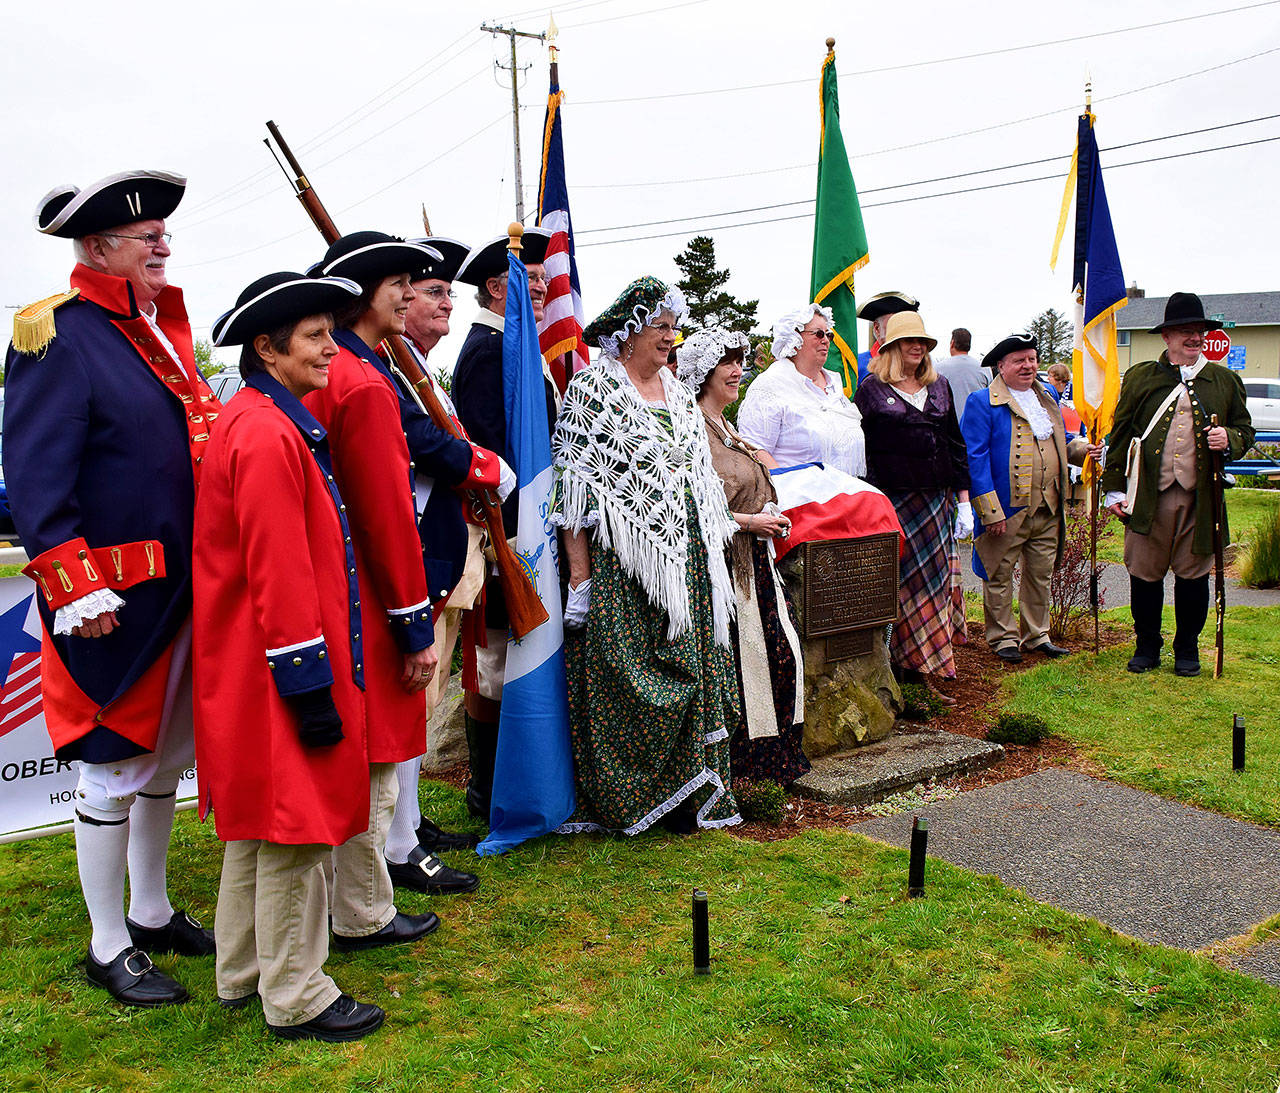 Scott D. Johnston photo The DAR’s Robert Gray Chapter in Hoquiam originally created and placed the Lone Tree Marker to commemorate the occasion on May 7, 1911. Members of that chapter were joined at the Coastal Interpretive Center for the dedication of the restored and relocated plaque on May 7, 2018, by members of five other Western Washington DAR chapters and two SAR chapters.